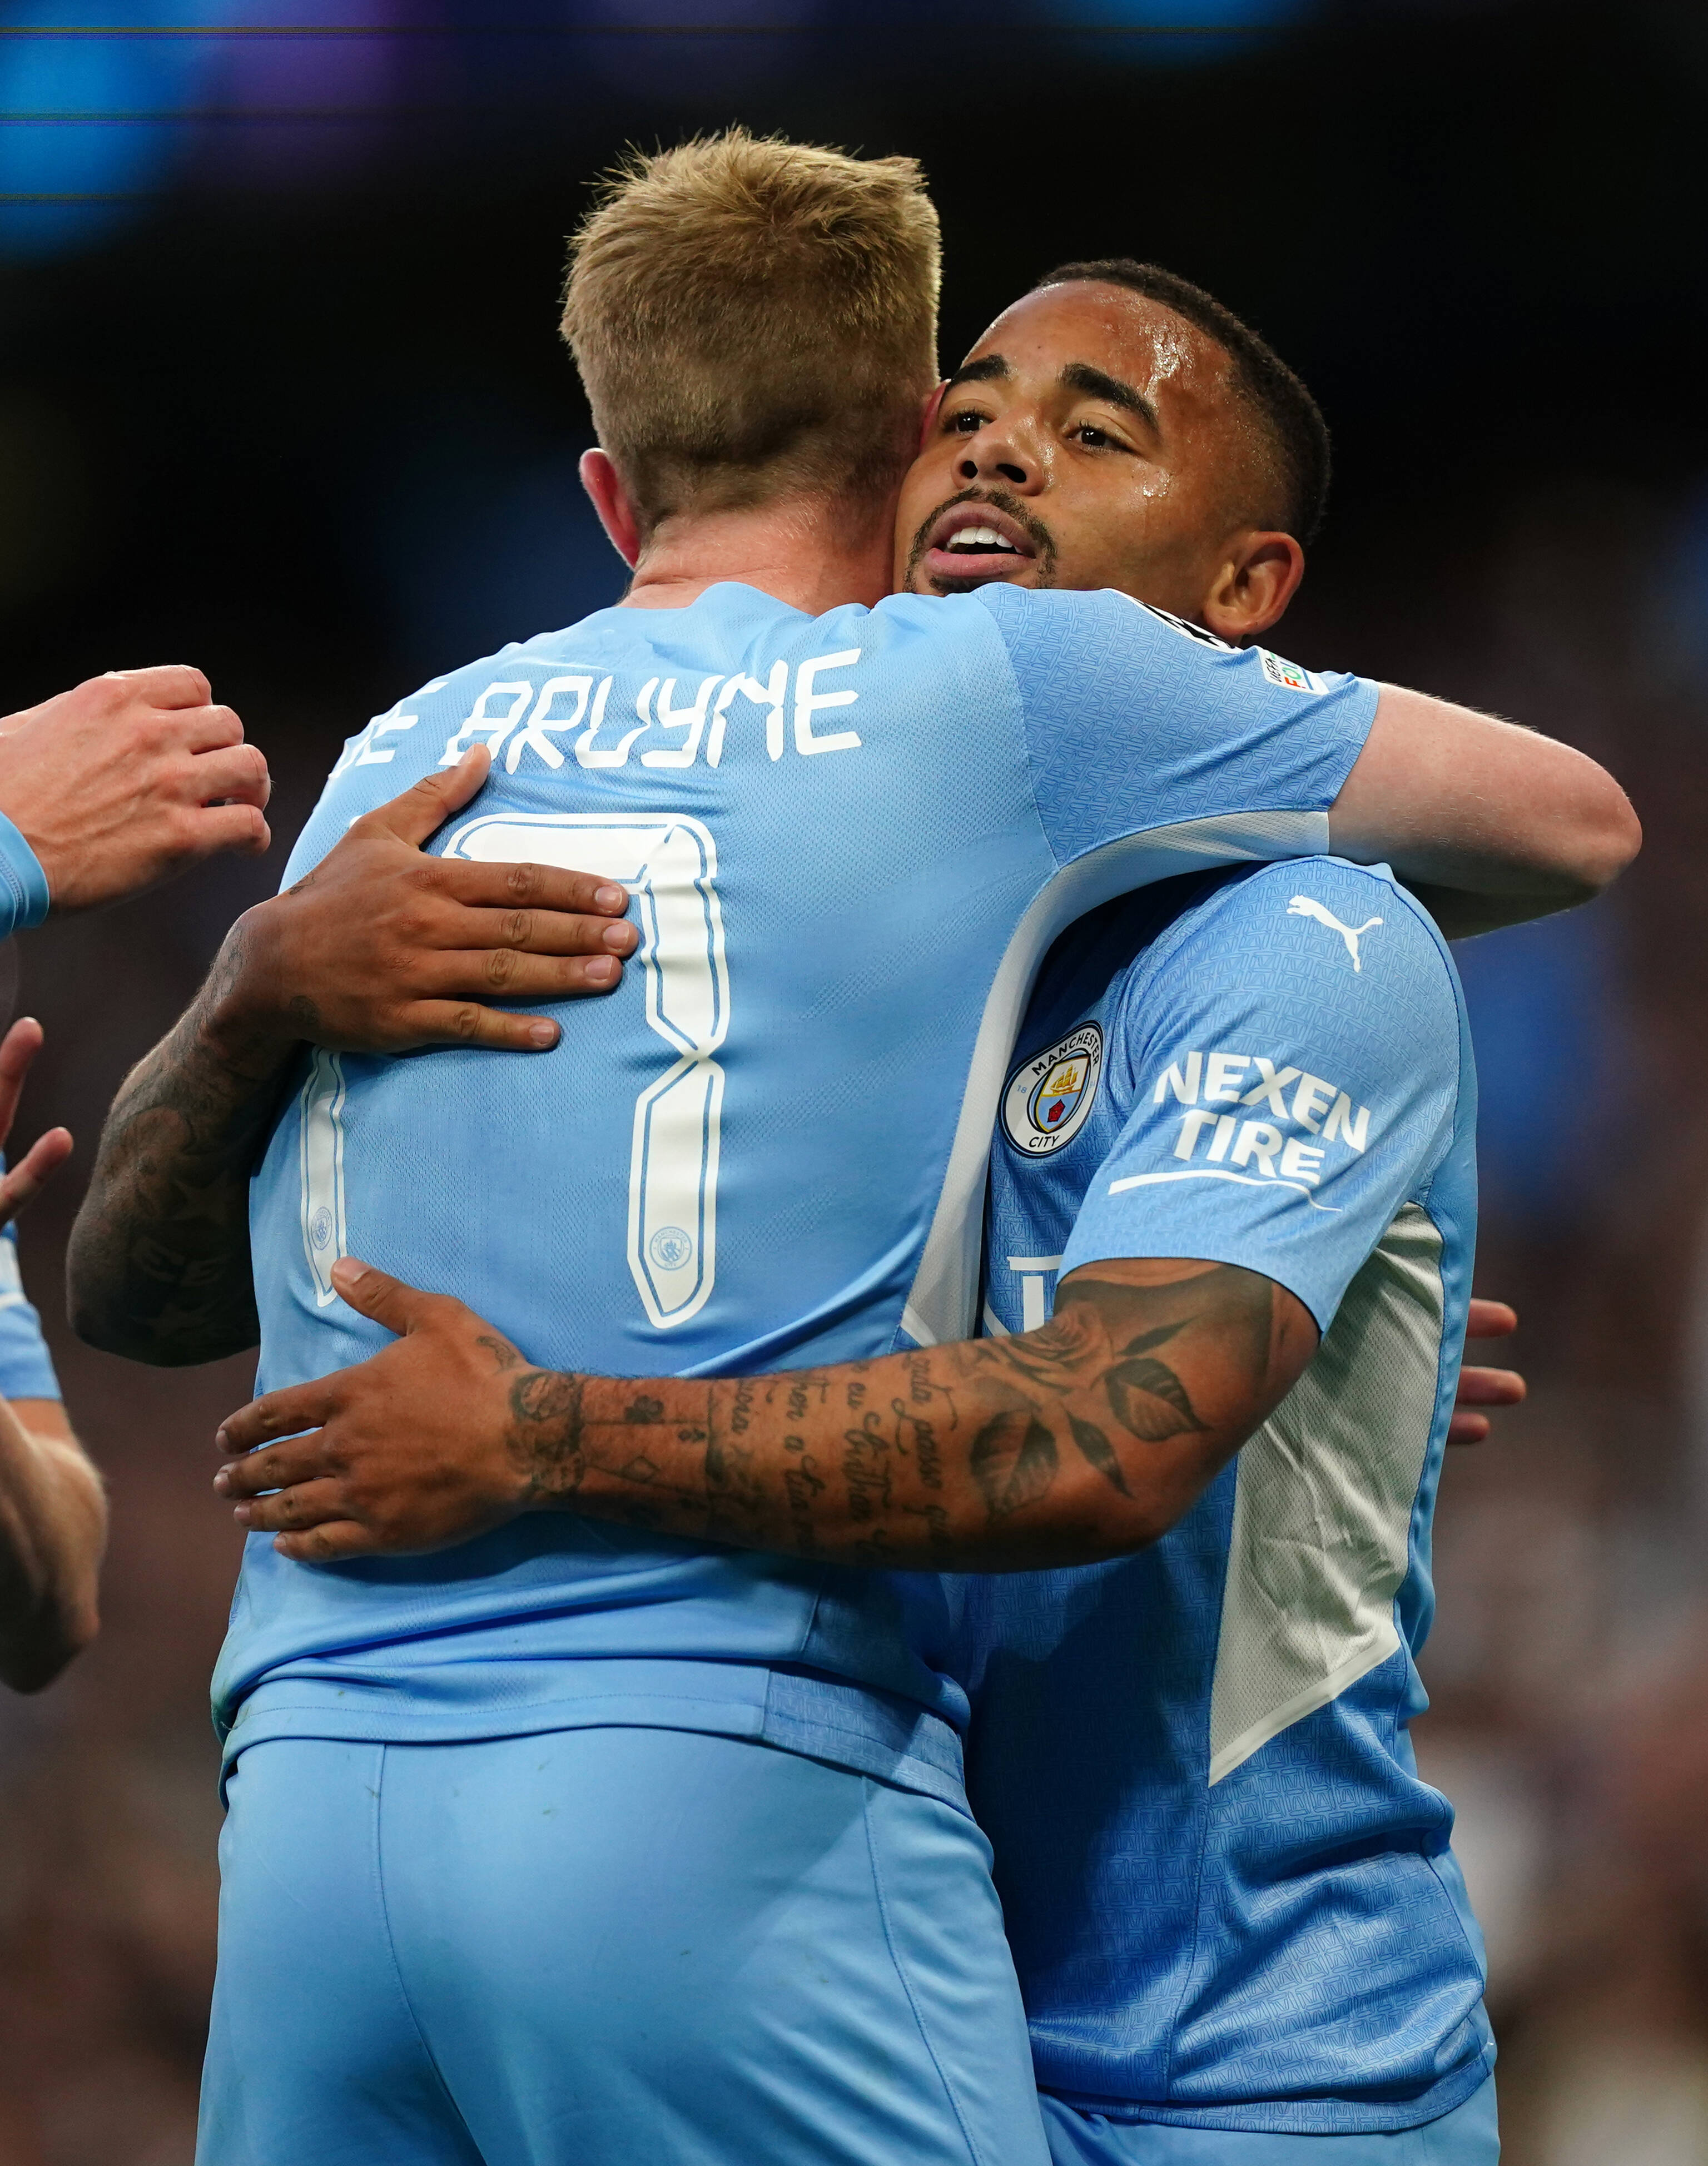 Kevin de Bruyne assisted Gabriel Jesus for Manchester City's second goal against Real Madrid on Tuesday night